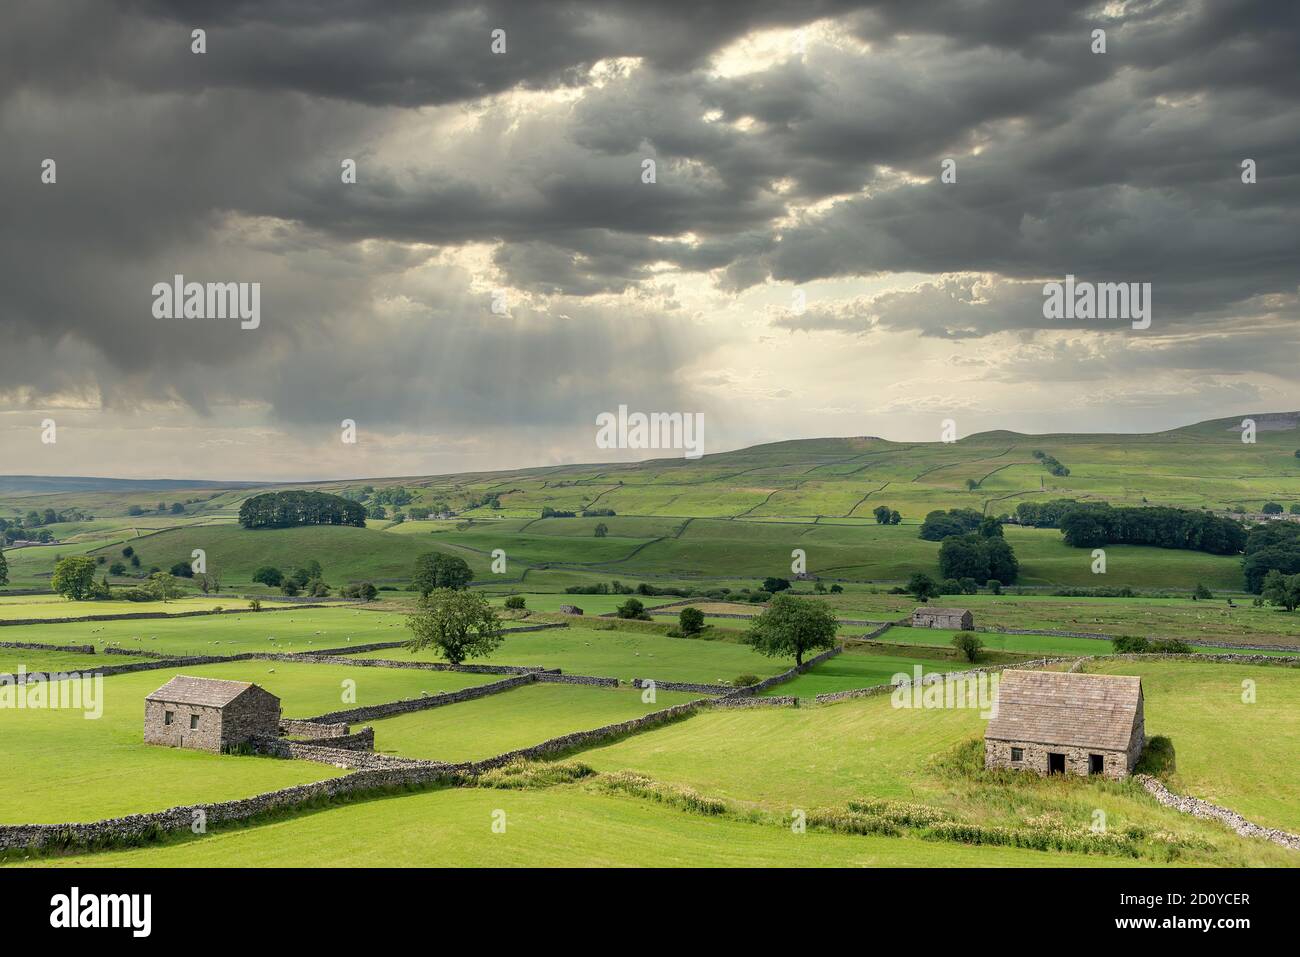 Cotterdale, Yorkshire Dales National Park, York, Uk; A view of an old stone barn, sheep and the rolling landscape of the Yorkshire Dales. Stock Photo